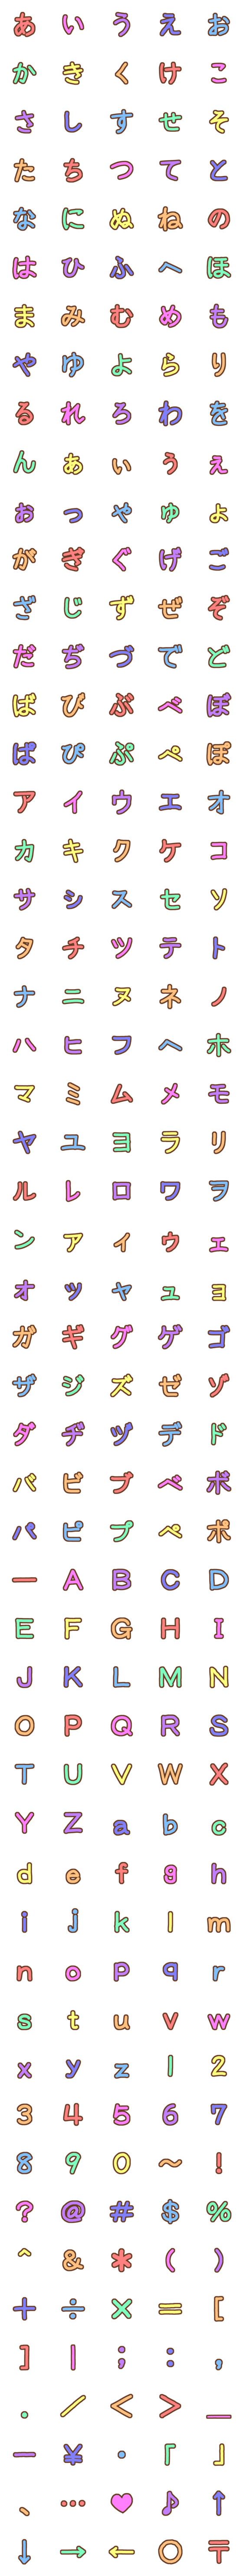 [LINE絵文字]手書きデコ文字の画像一覧